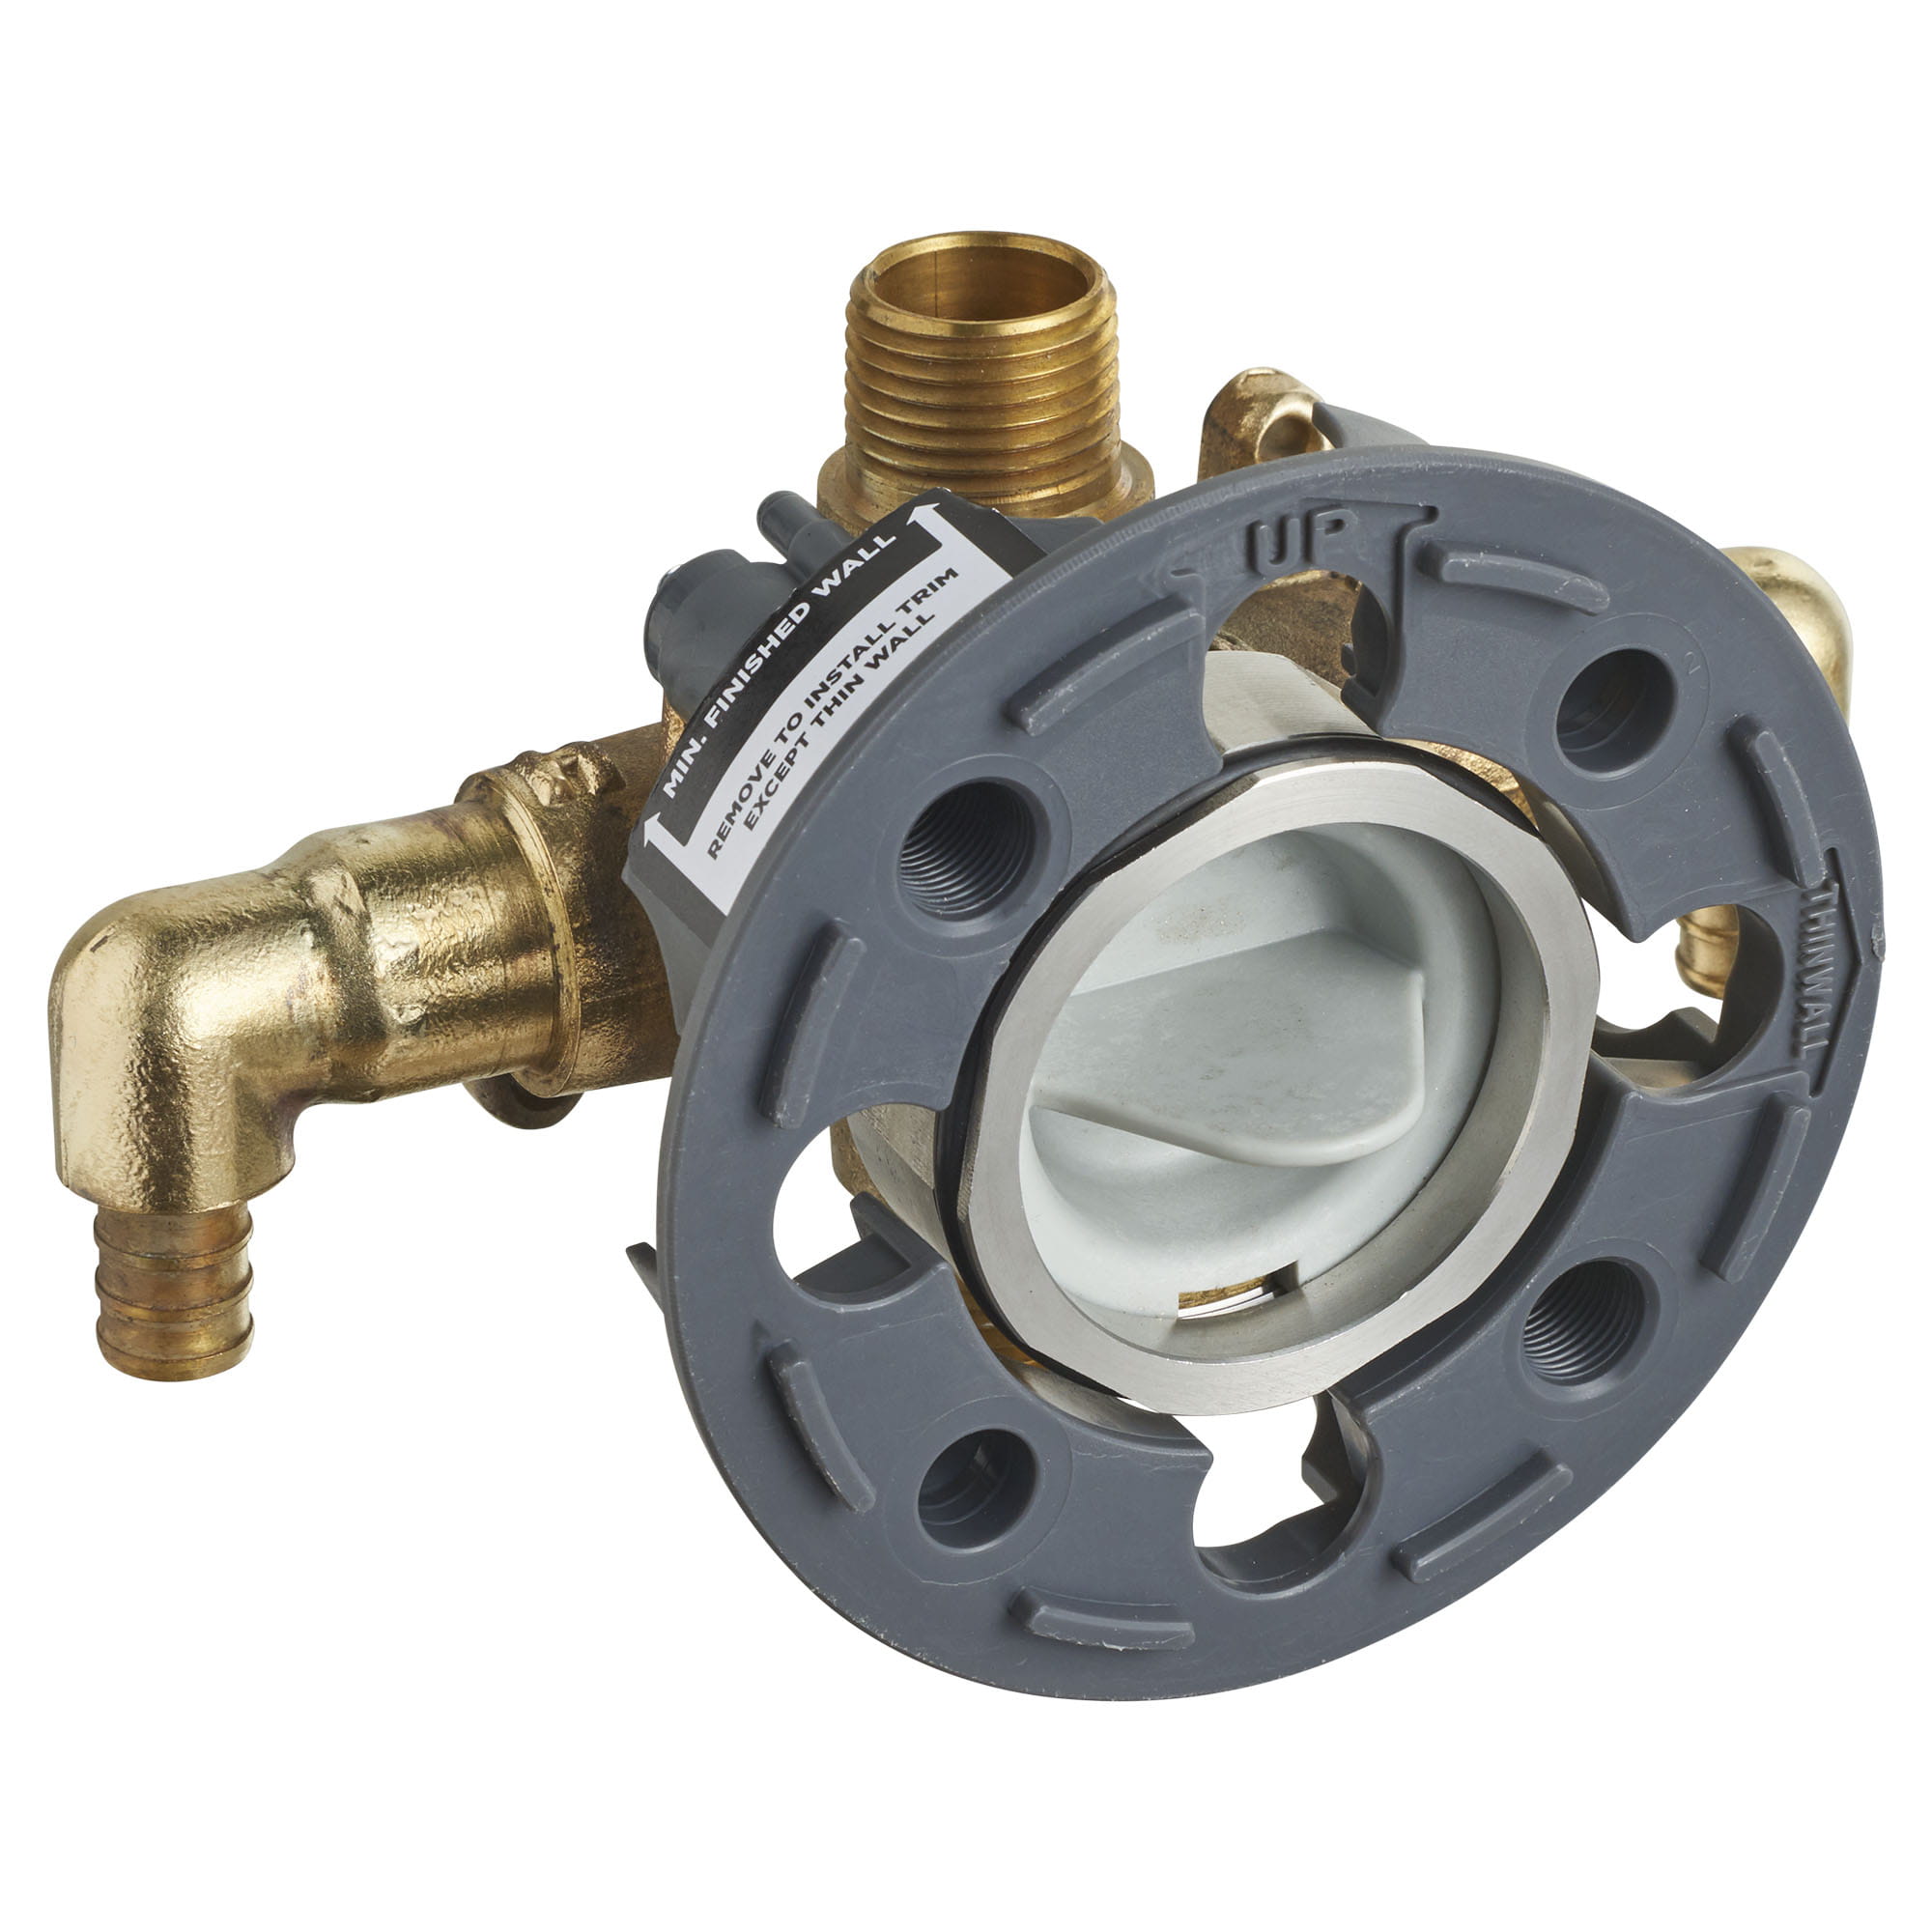 Flash® Shower Rough-In Valve With PEX Inlet Elbows/Universal Outlets for Crimp Ring System